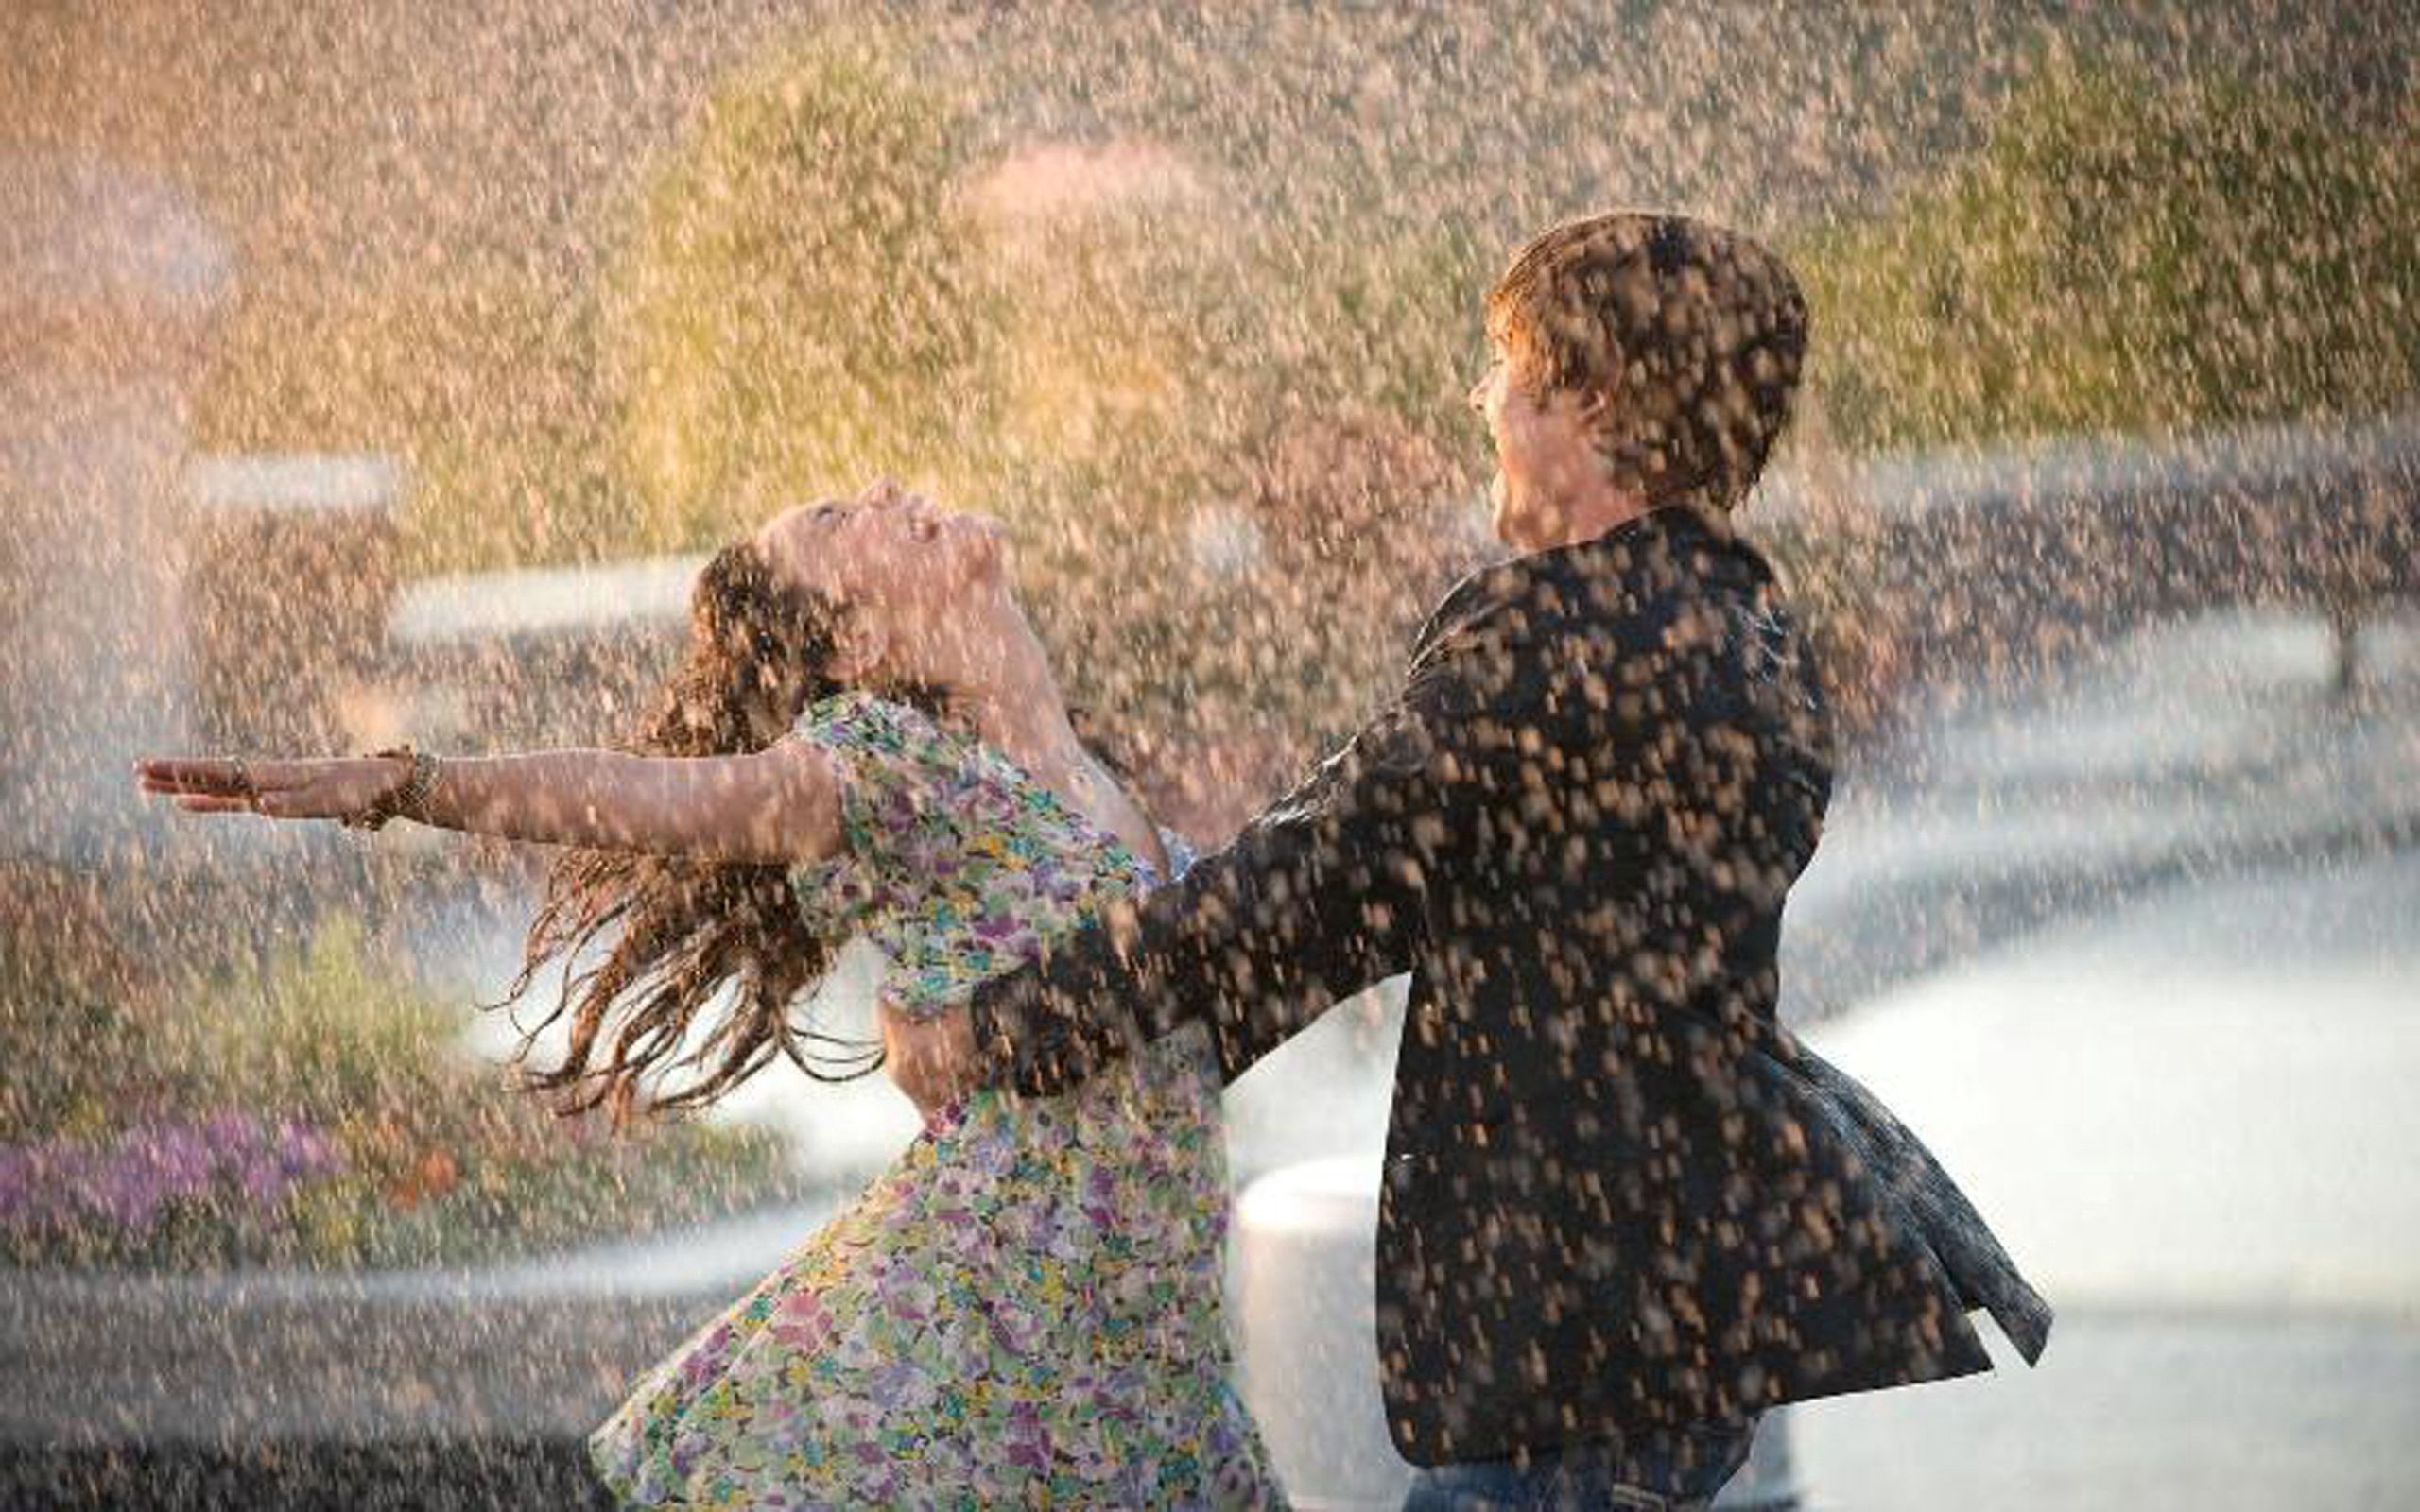 128090 download wallpaper rain, love, dance, couple, pair, wet, happiness screensavers and pictures for free